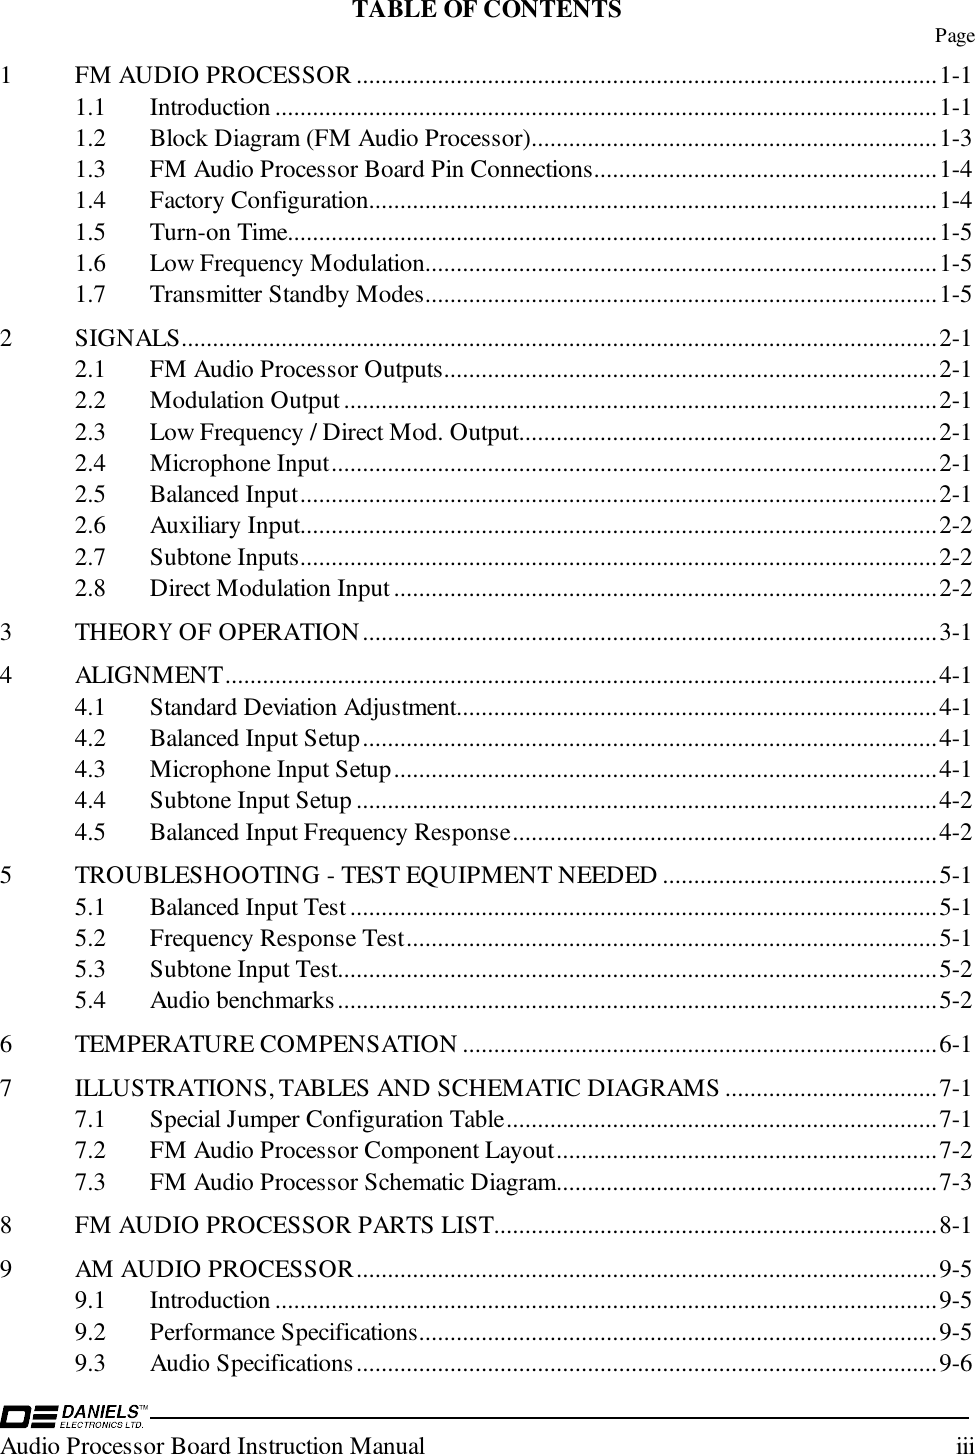 Audio Processor Board Instruction Manual iiiTABLE OF CONTENTS Page1 FM AUDIO PROCESSOR .............................................................................................1-11.1 Introduction ..........................................................................................................1-11.2 Block Diagram (FM Audio Processor).................................................................1-31.3 FM Audio Processor Board Pin Connections.......................................................1-41.4 Factory Configuration...........................................................................................1-41.5 Turn-on Time........................................................................................................1-51.6 Low Frequency Modulation..................................................................................1-51.7 Transmitter Standby Modes..................................................................................1-52 SIGNALS.........................................................................................................................2-12.1 FM Audio Processor Outputs...............................................................................2-12.2 Modulation Output...............................................................................................2-12.3 Low Frequency / Direct Mod. Output...................................................................2-12.4 Microphone Input.................................................................................................2-12.5 Balanced Input......................................................................................................2-12.6 Auxiliary Input......................................................................................................2-22.7 Subtone Inputs......................................................................................................2-22.8 Direct Modulation Input.......................................................................................2-23 THEORY OF OPERATION............................................................................................3-14 ALIGNMENT..................................................................................................................4-14.1 Standard Deviation Adjustment.............................................................................4-14.2 Balanced Input Setup............................................................................................4-14.3 Microphone Input Setup.......................................................................................4-14.4 Subtone Input Setup .............................................................................................4-24.5 Balanced Input Frequency Response....................................................................4-25 TROUBLESHOOTING - TEST EQUIPMENT NEEDED ............................................5-15.1 Balanced Input Test ..............................................................................................5-15.2 Frequency Response Test.....................................................................................5-15.3 Subtone Input Test................................................................................................5-25.4 Audio benchmarks................................................................................................5-26 TEMPERATURE COMPENSATION ............................................................................6-17 ILLUSTRATIONS, TABLES AND SCHEMATIC DIAGRAMS ..................................7-17.1 Special Jumper Configuration Table.....................................................................7-17.2 FM Audio Processor Component Layout.............................................................7-27.3 FM Audio Processor Schematic Diagram.............................................................7-38 FM AUDIO PROCESSOR PARTS LIST.......................................................................8-19 AM AUDIO PROCESSOR.............................................................................................9-59.1 Introduction ..........................................................................................................9-59.2 Performance Specifications...................................................................................9-59.3 Audio Specifications.............................................................................................9-6